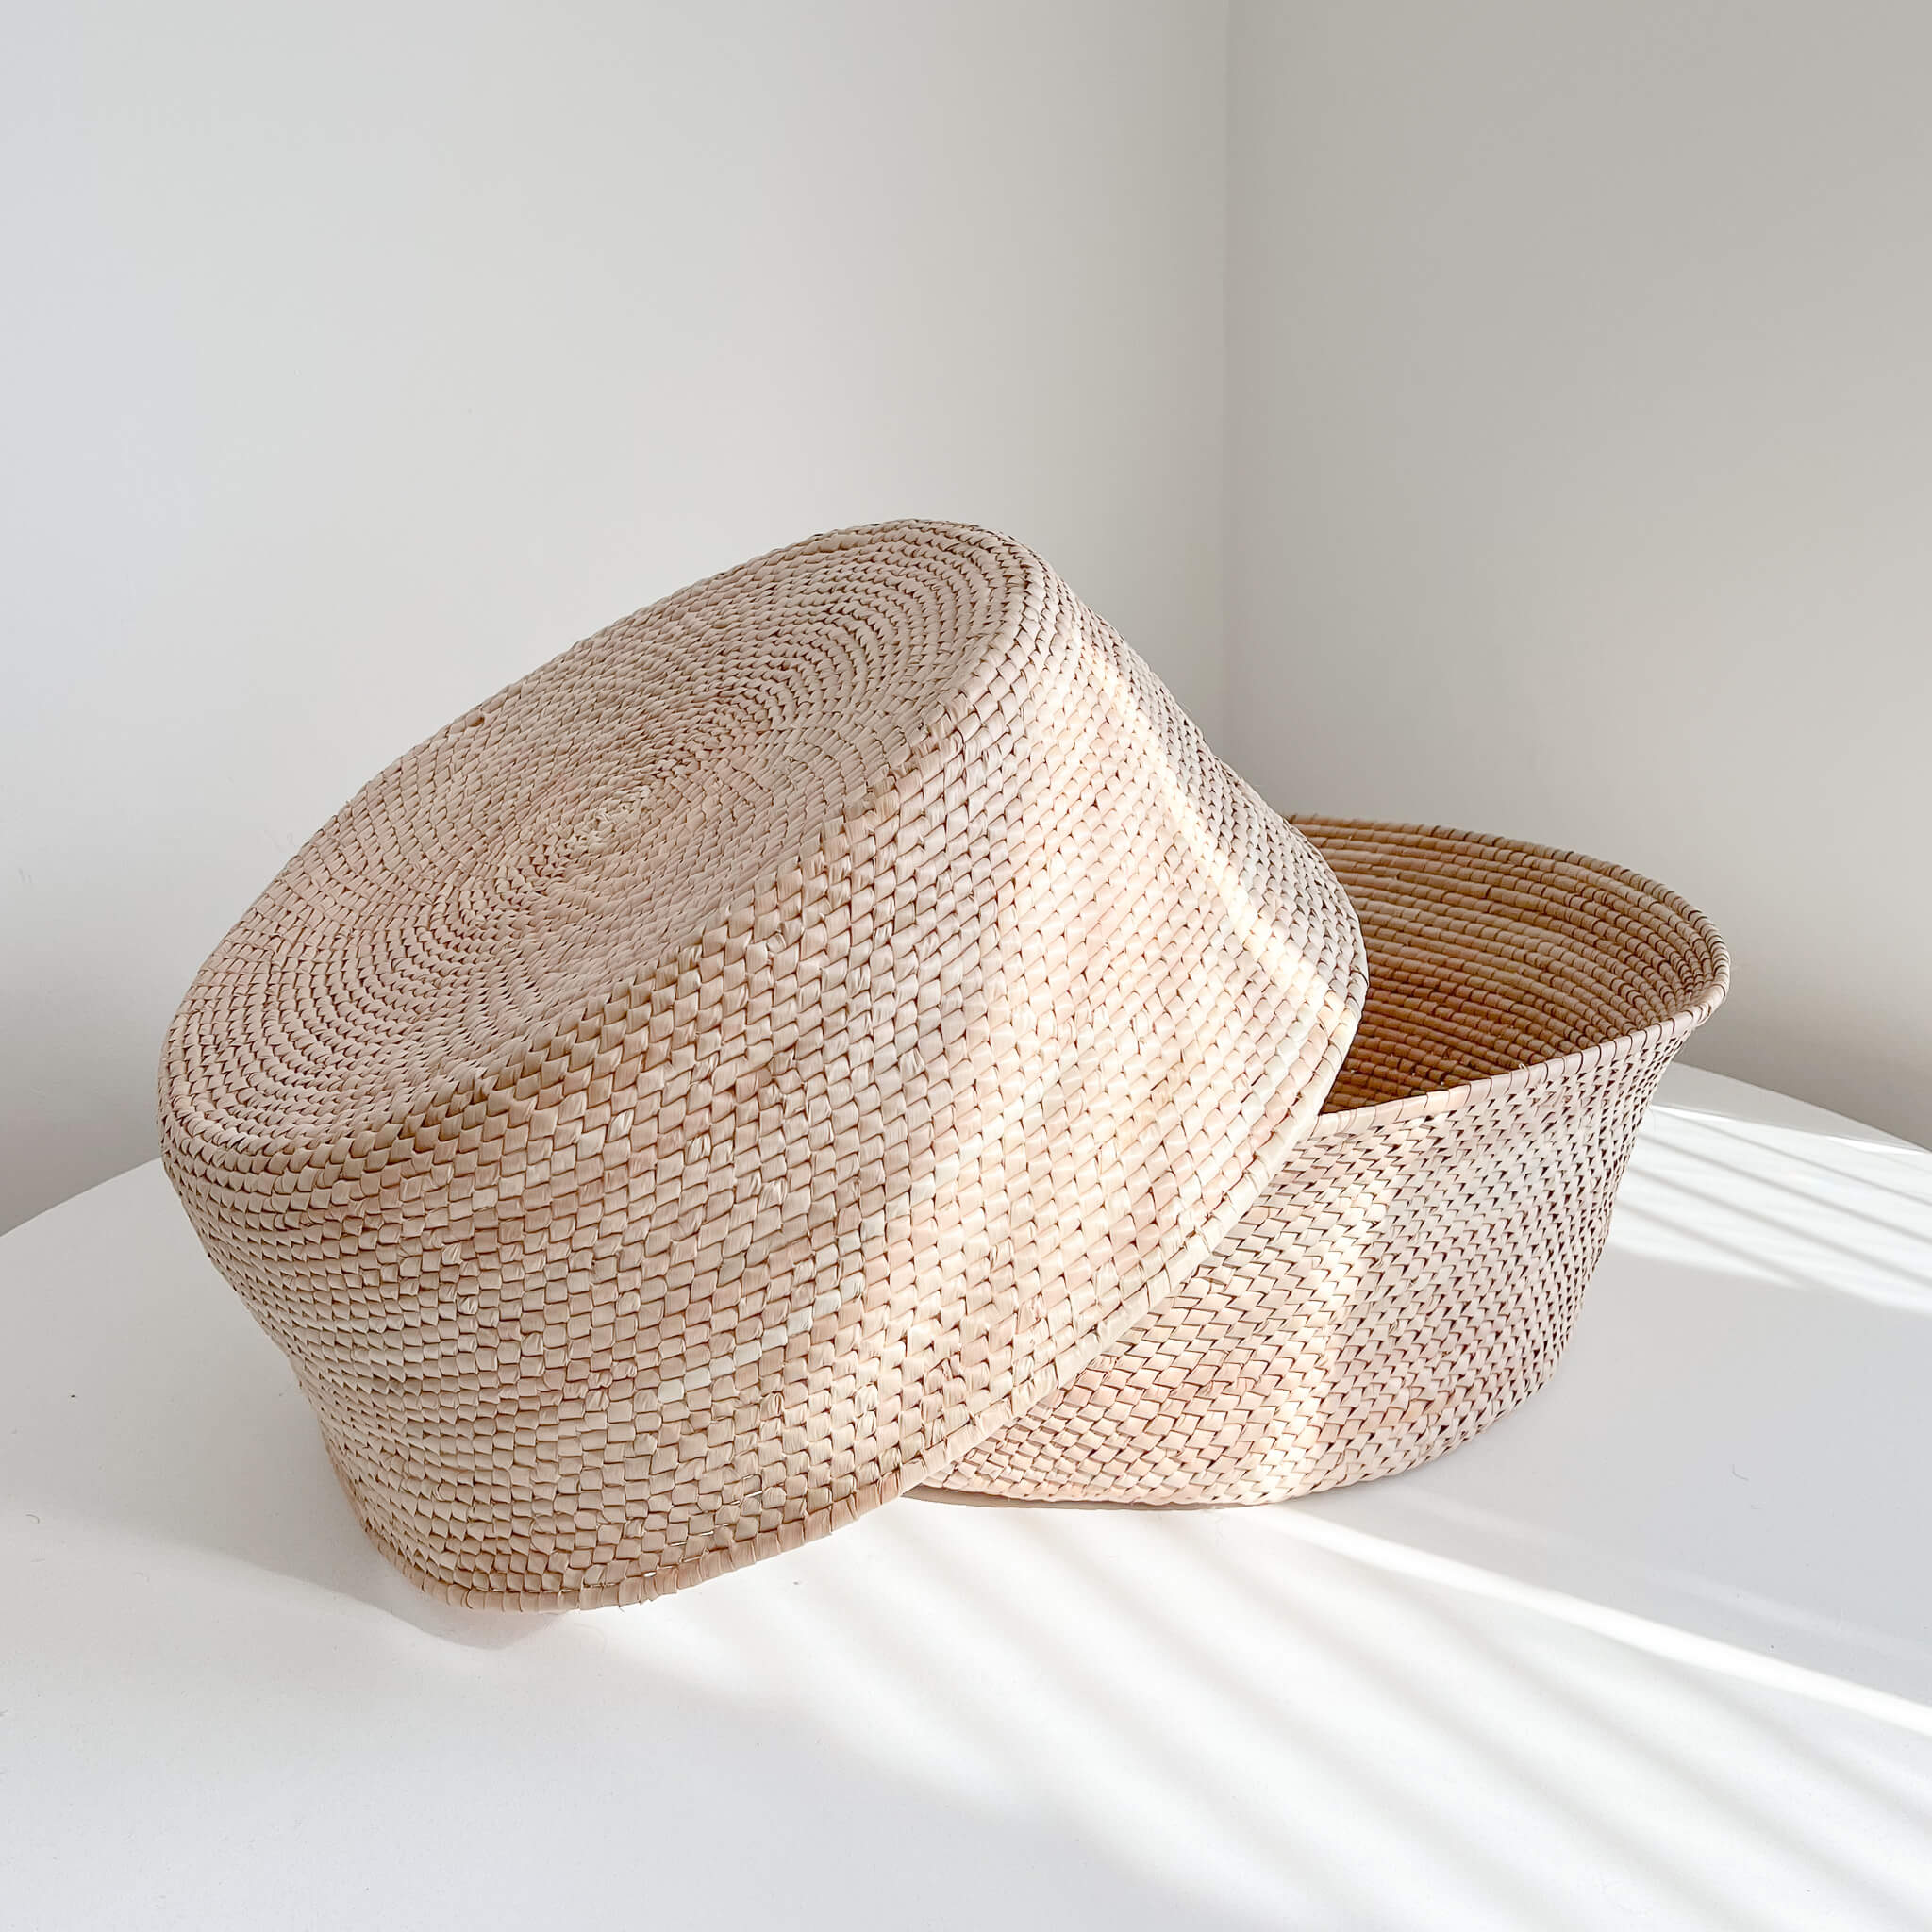 Large handwoven palm floor baskets on a white table.